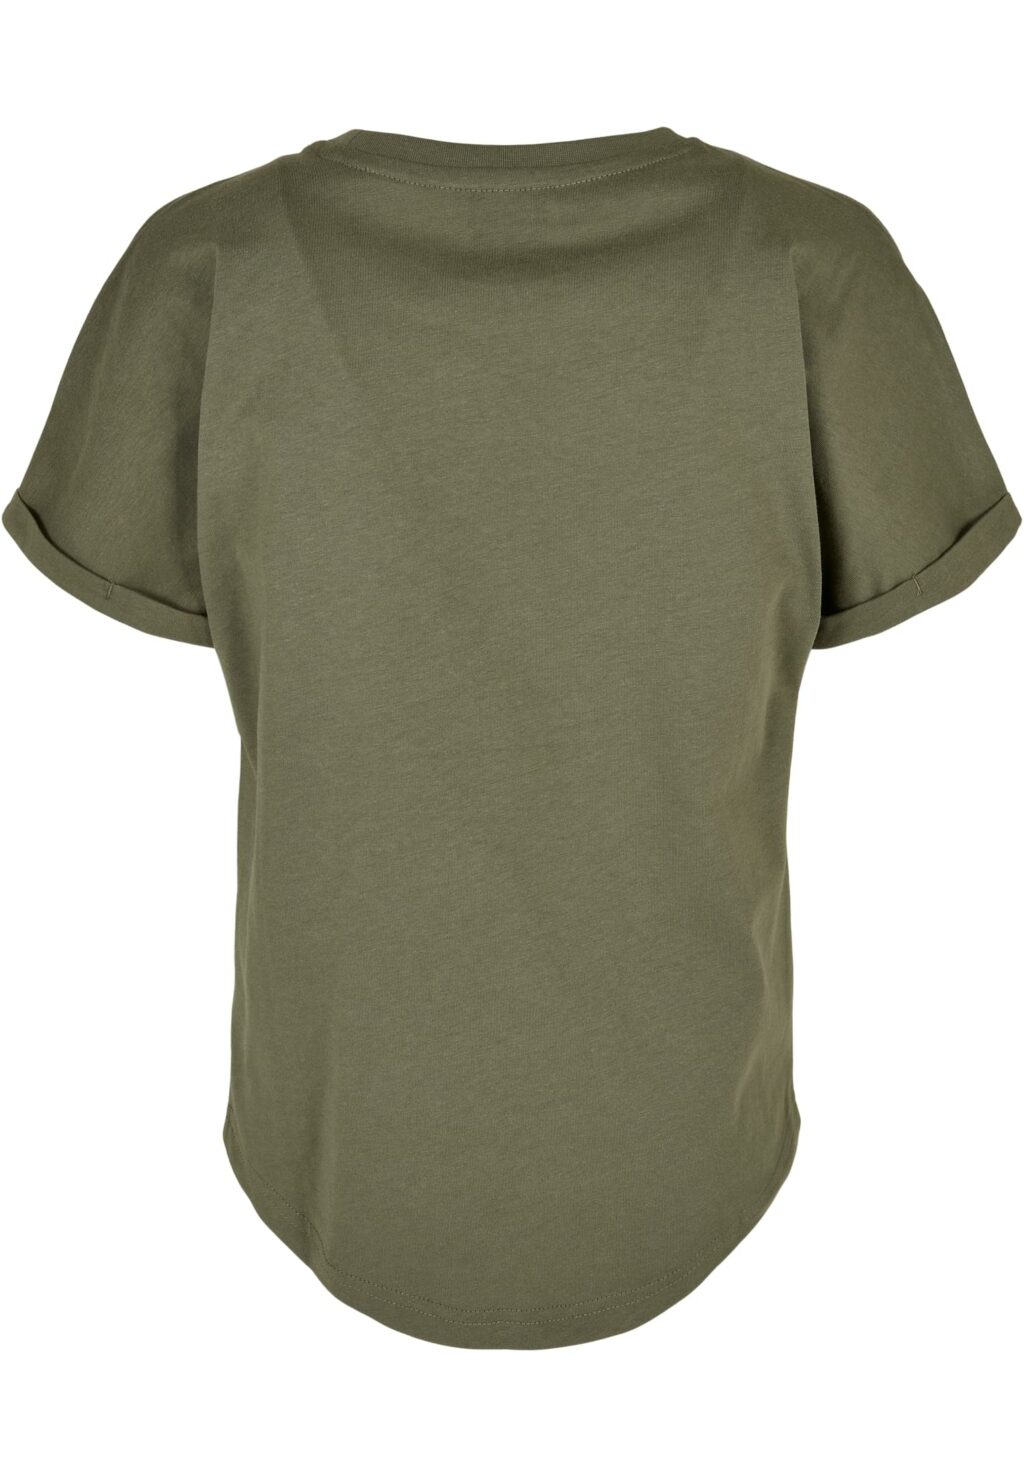 Boys Long Shaped Turnup Tee olive UCK1561